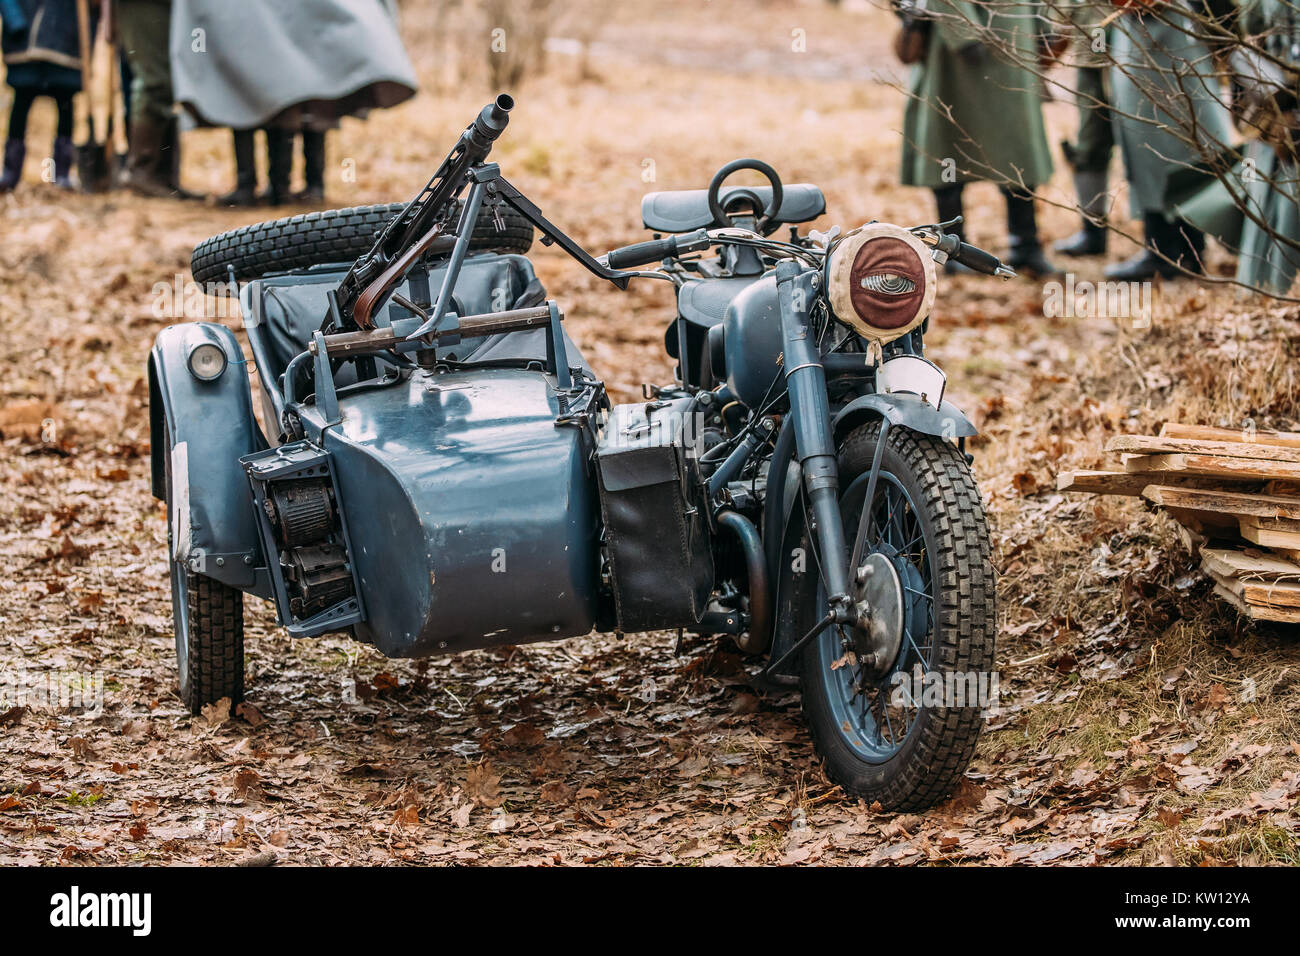 Old Tricar, Three-Wheeled Motorbike With Machine Gun On Sidecar Of Wehrmacht, Armed Forces Of Germany Of World War II Time In Autumn Forest. Stock Photo